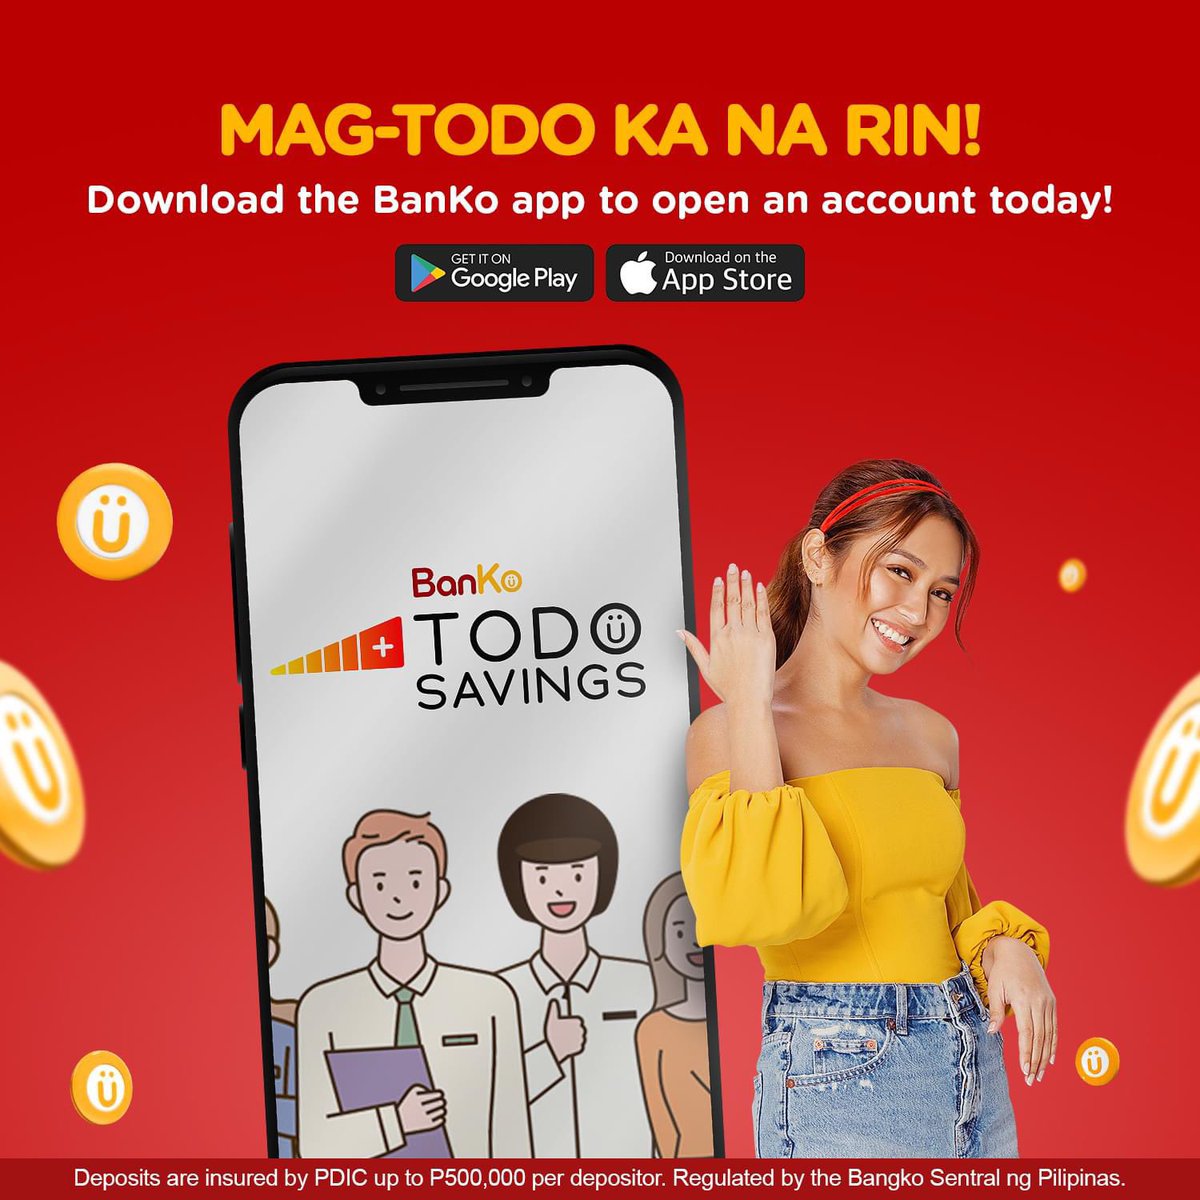 Bakit ko ginusto mag-TODO? Swipe to find out! Ikaw naman, mag- TODO ka na rin! Download the BanKo app to open a TODO Savings Account today. BanKo is regulated by the Banko Sentral ng Pilipinas. bsp.gov.ph Deposits are insured by PDIC up to P500,000 per depositor.